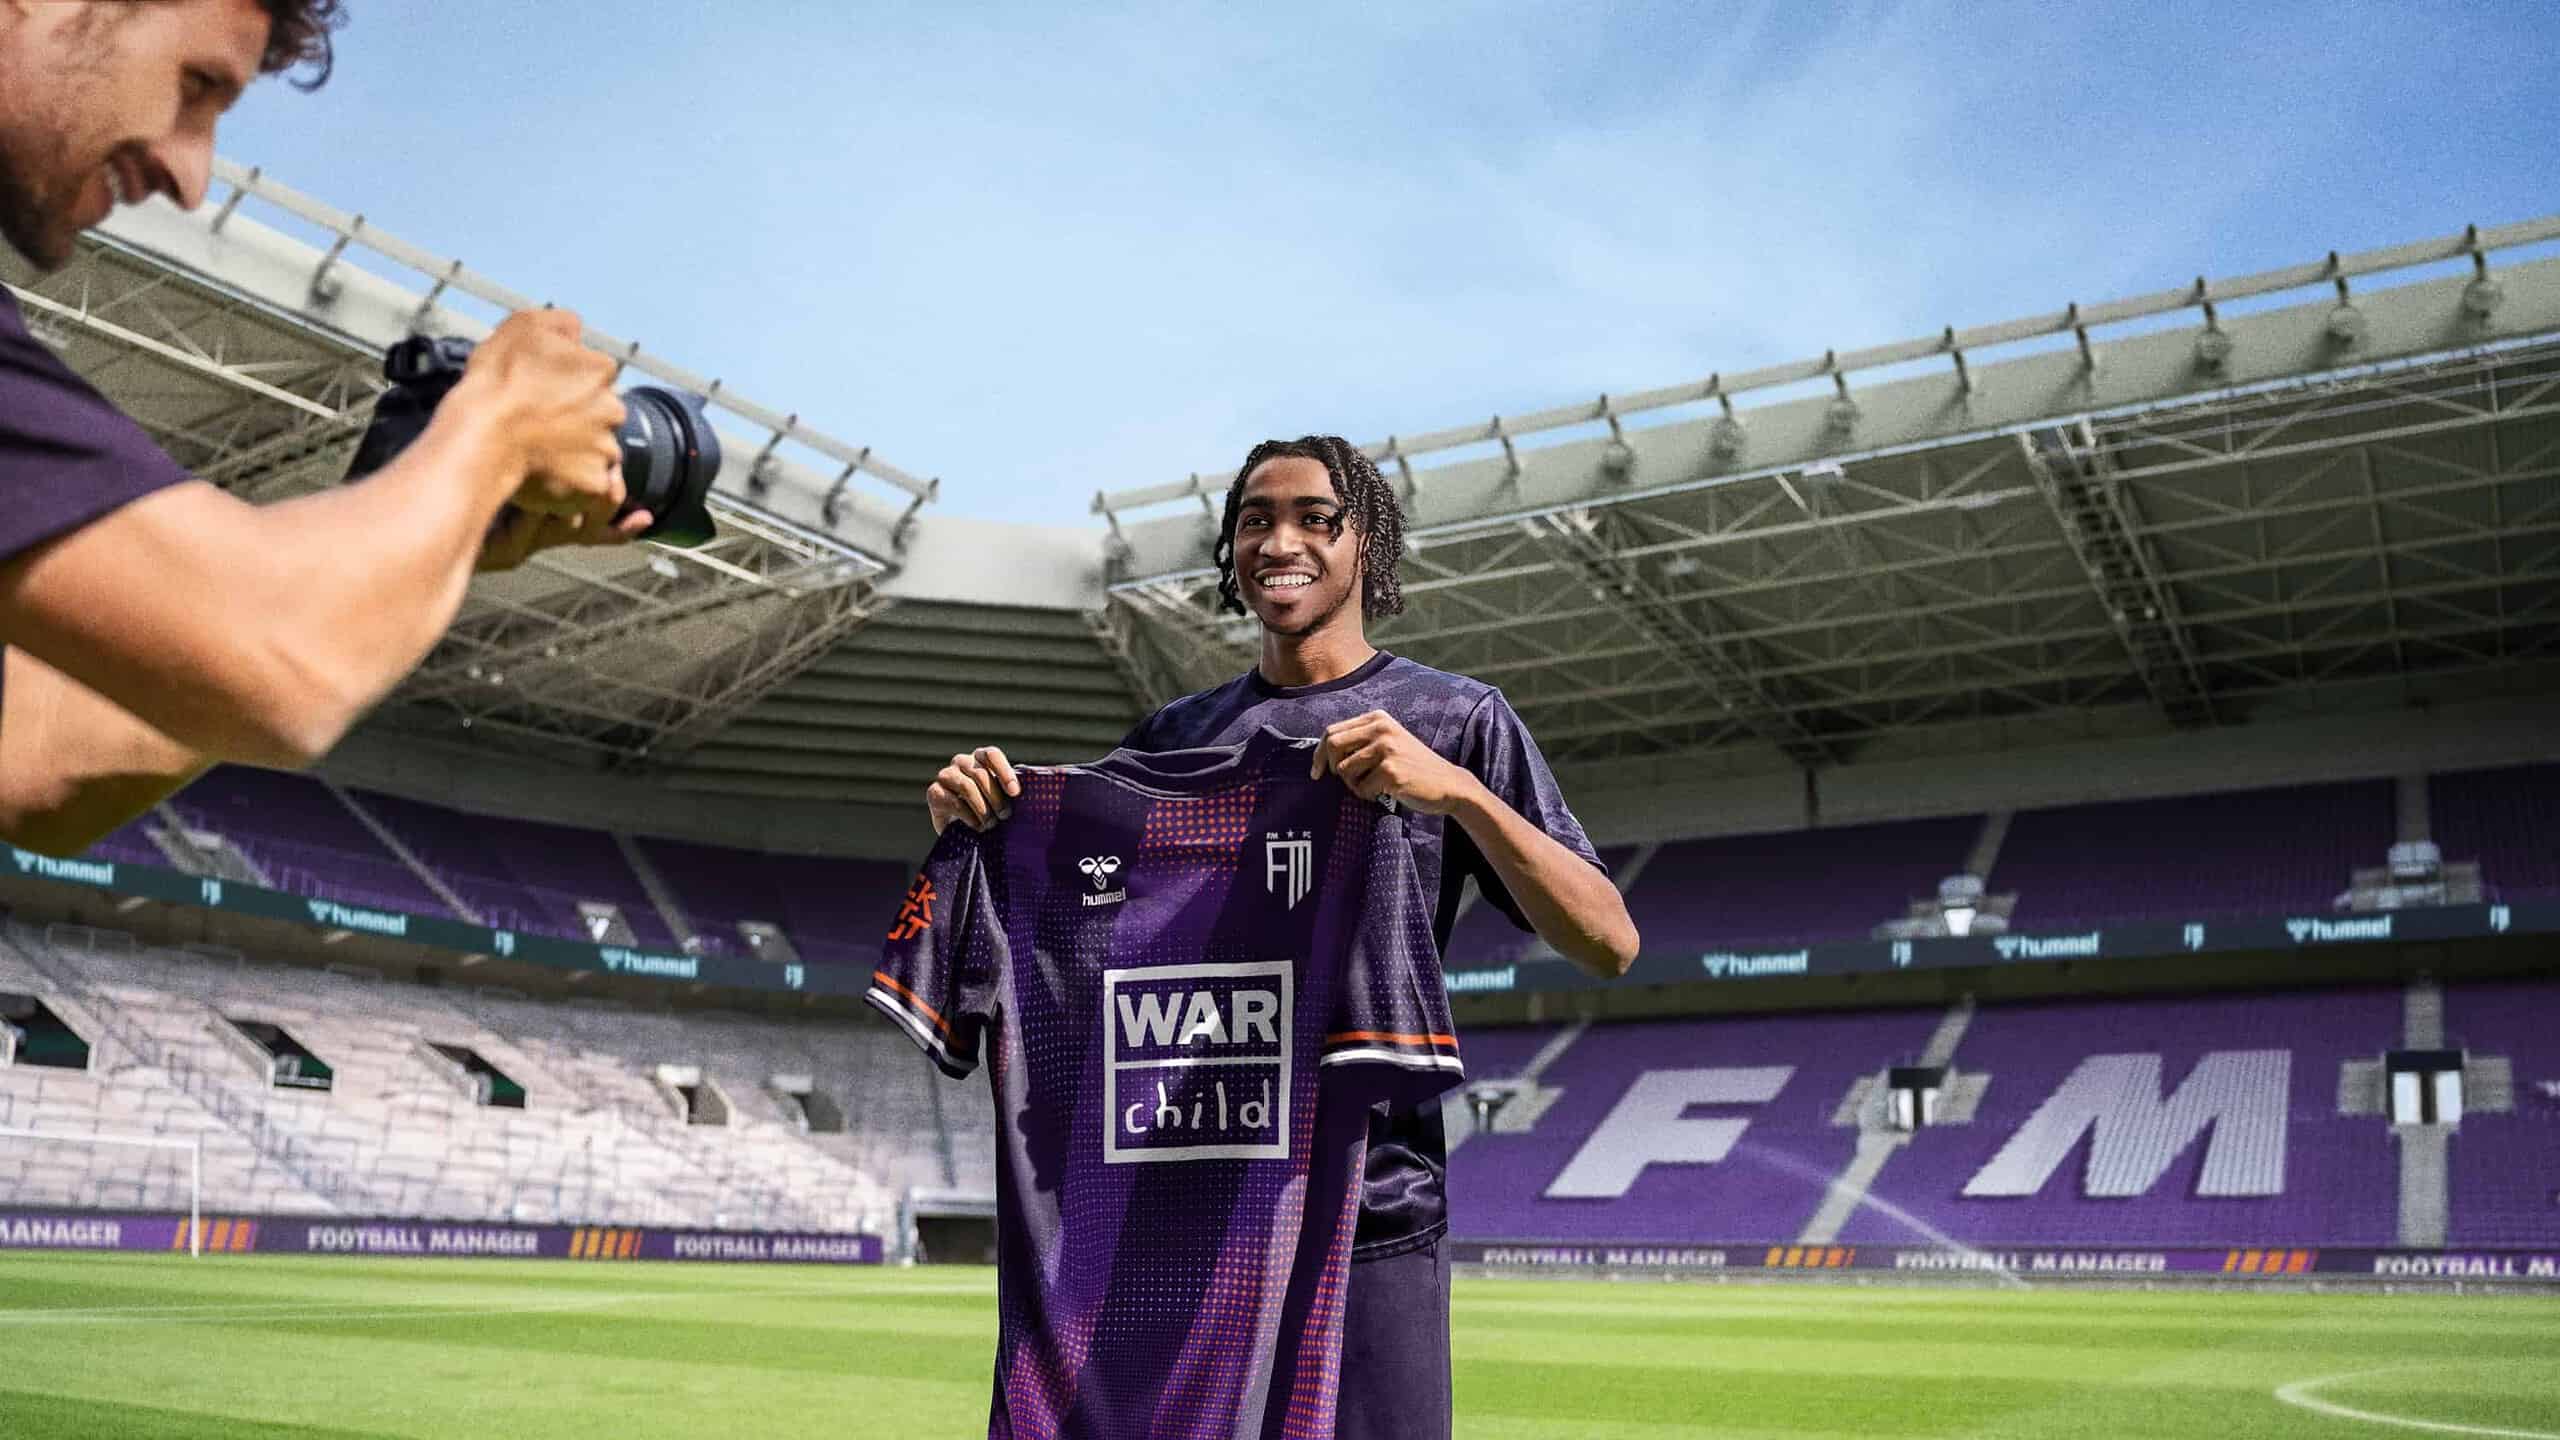 Football Manager 2024: A footballer holding up a jersey in an empty stadium while a man takes his picture.